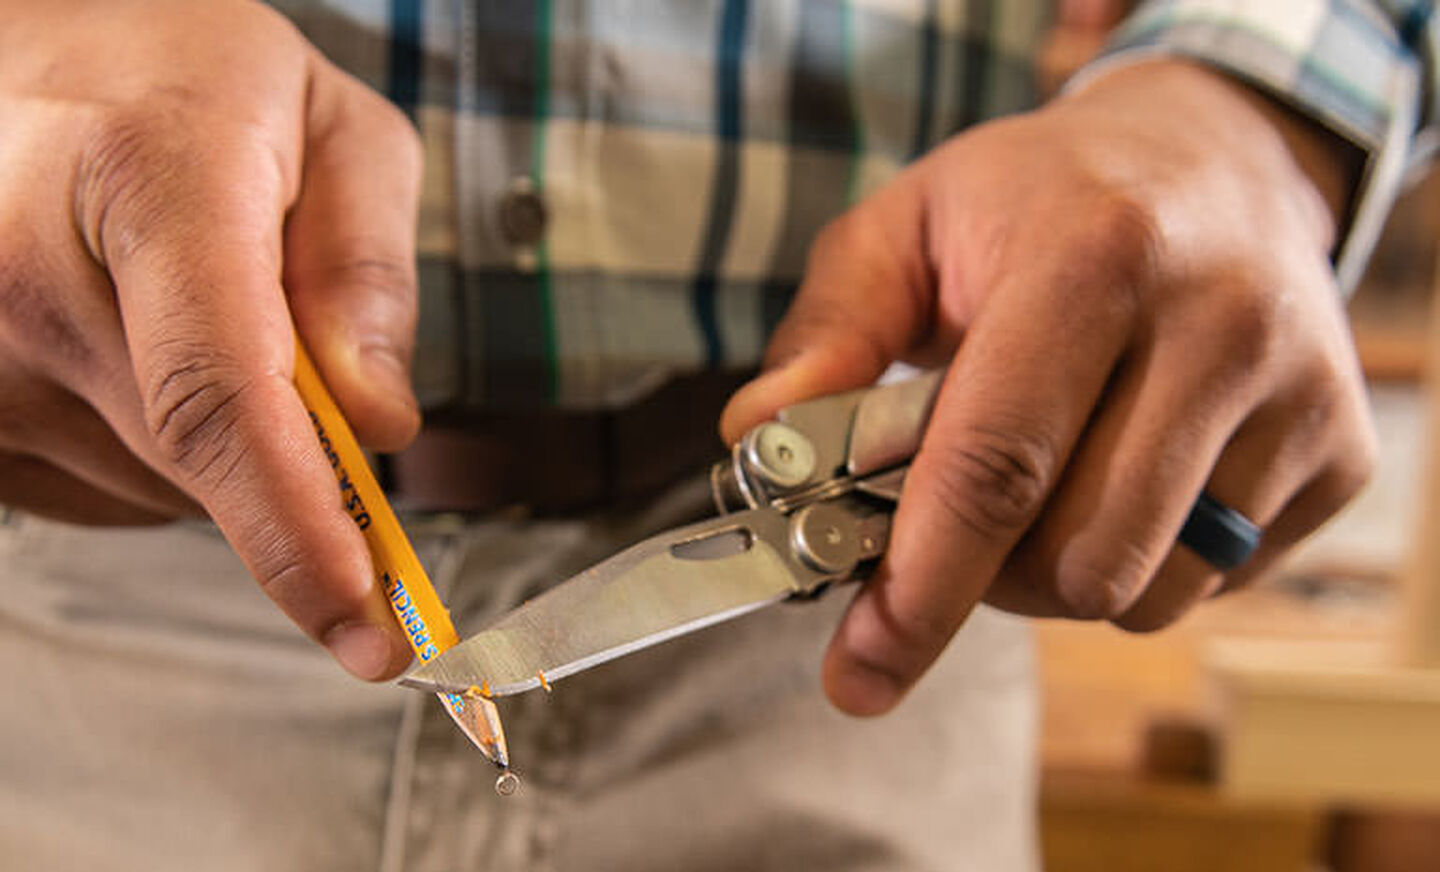 Man using knife blade on Leatherman Curl to sharpen yellow pencil 